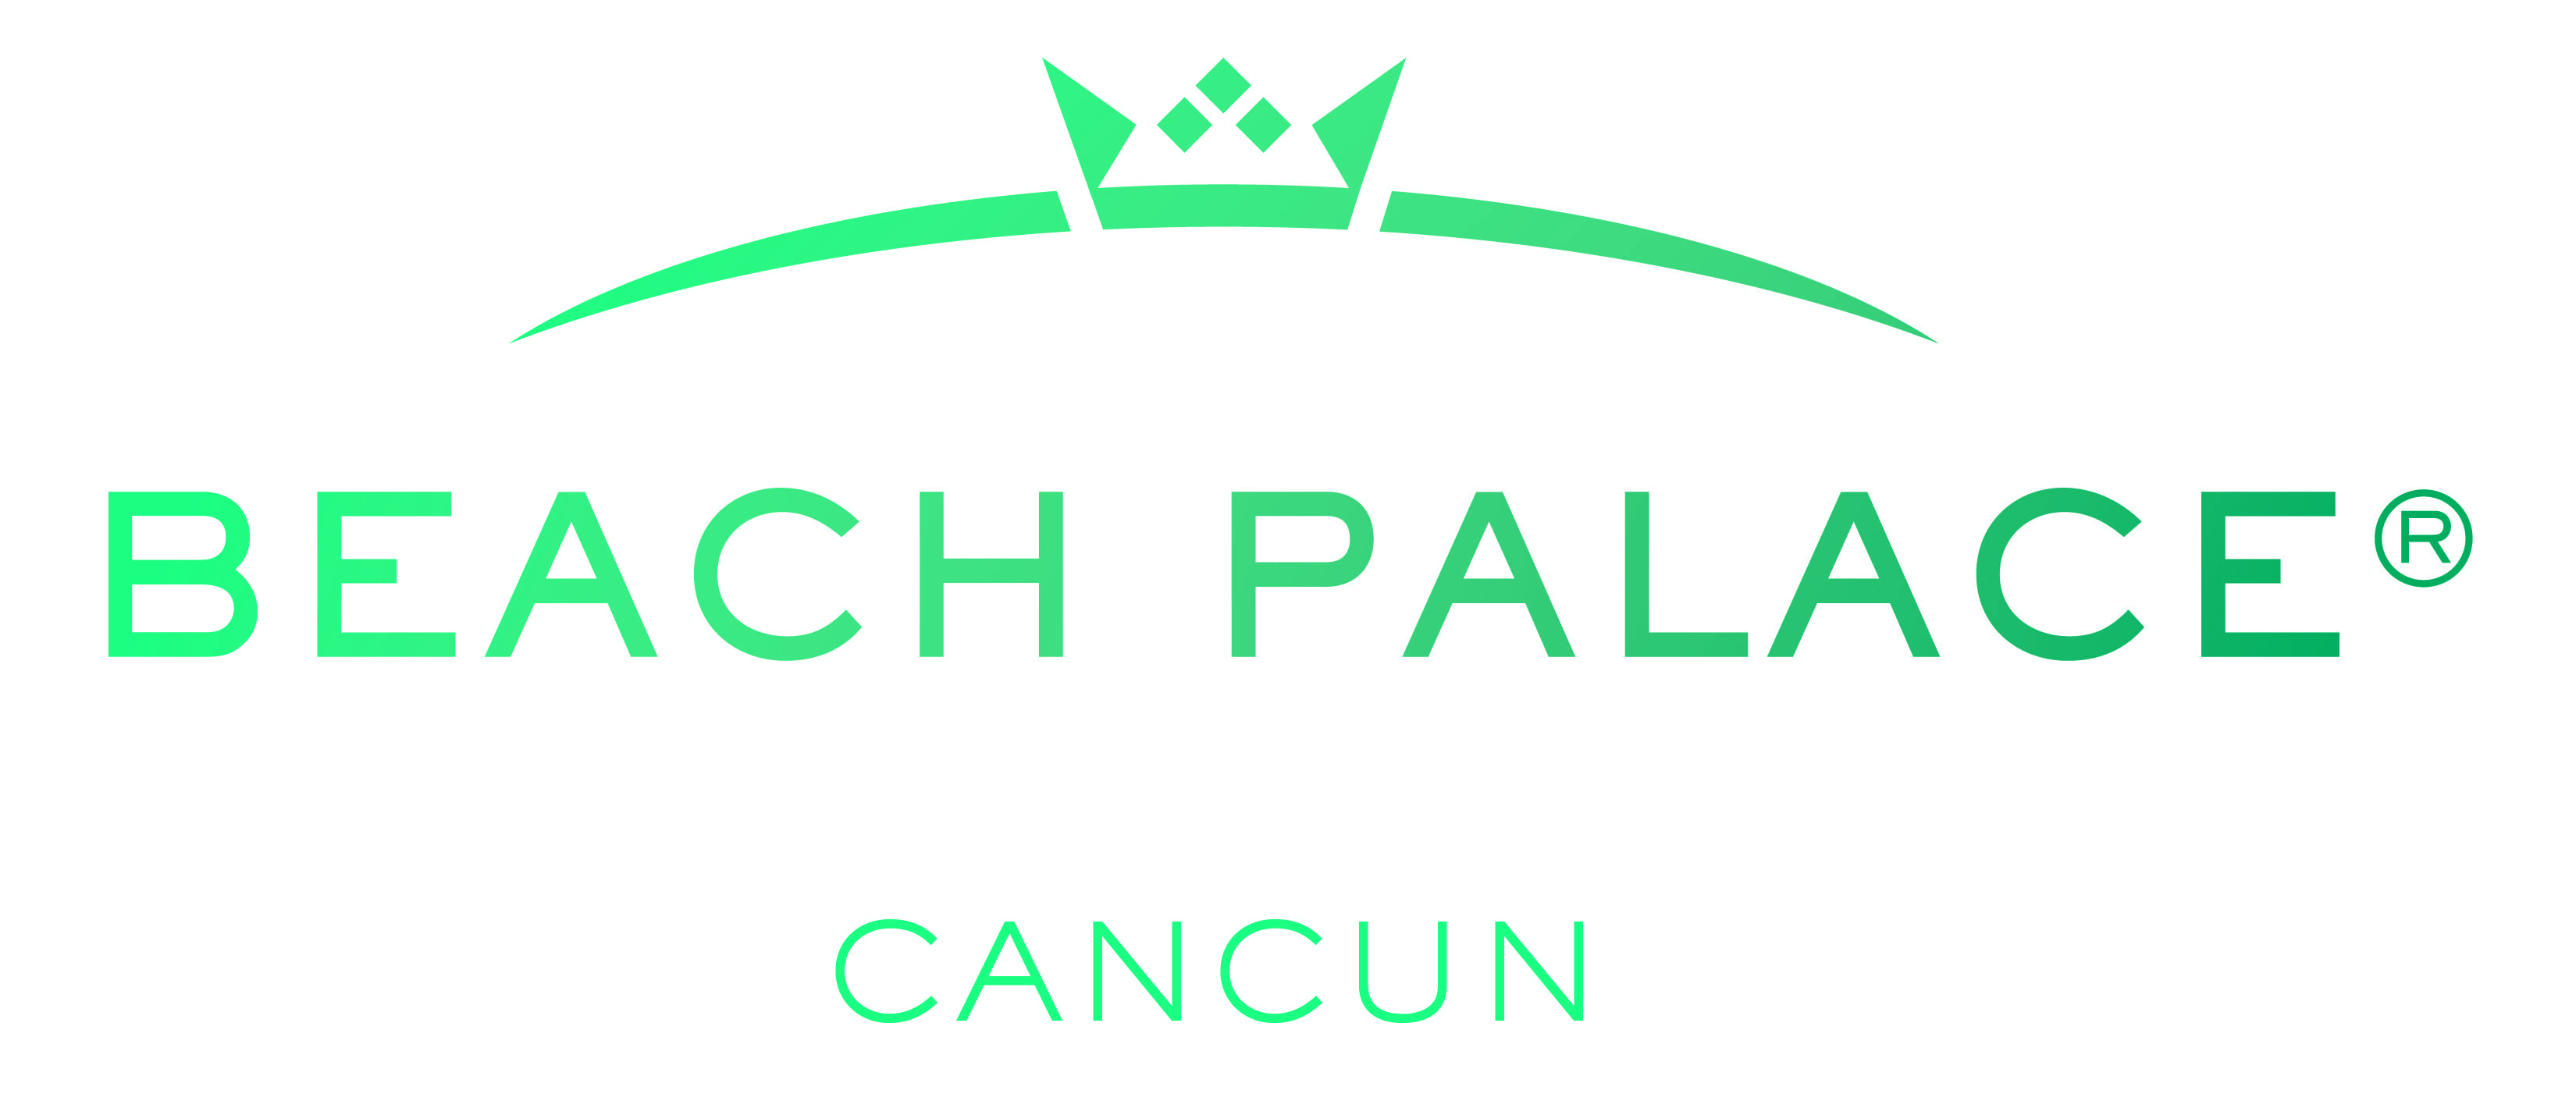 Palace Resorts Travel Specialist Logo - Beach Palace Resort Inclusive Deals, Cancun Vacation Packages